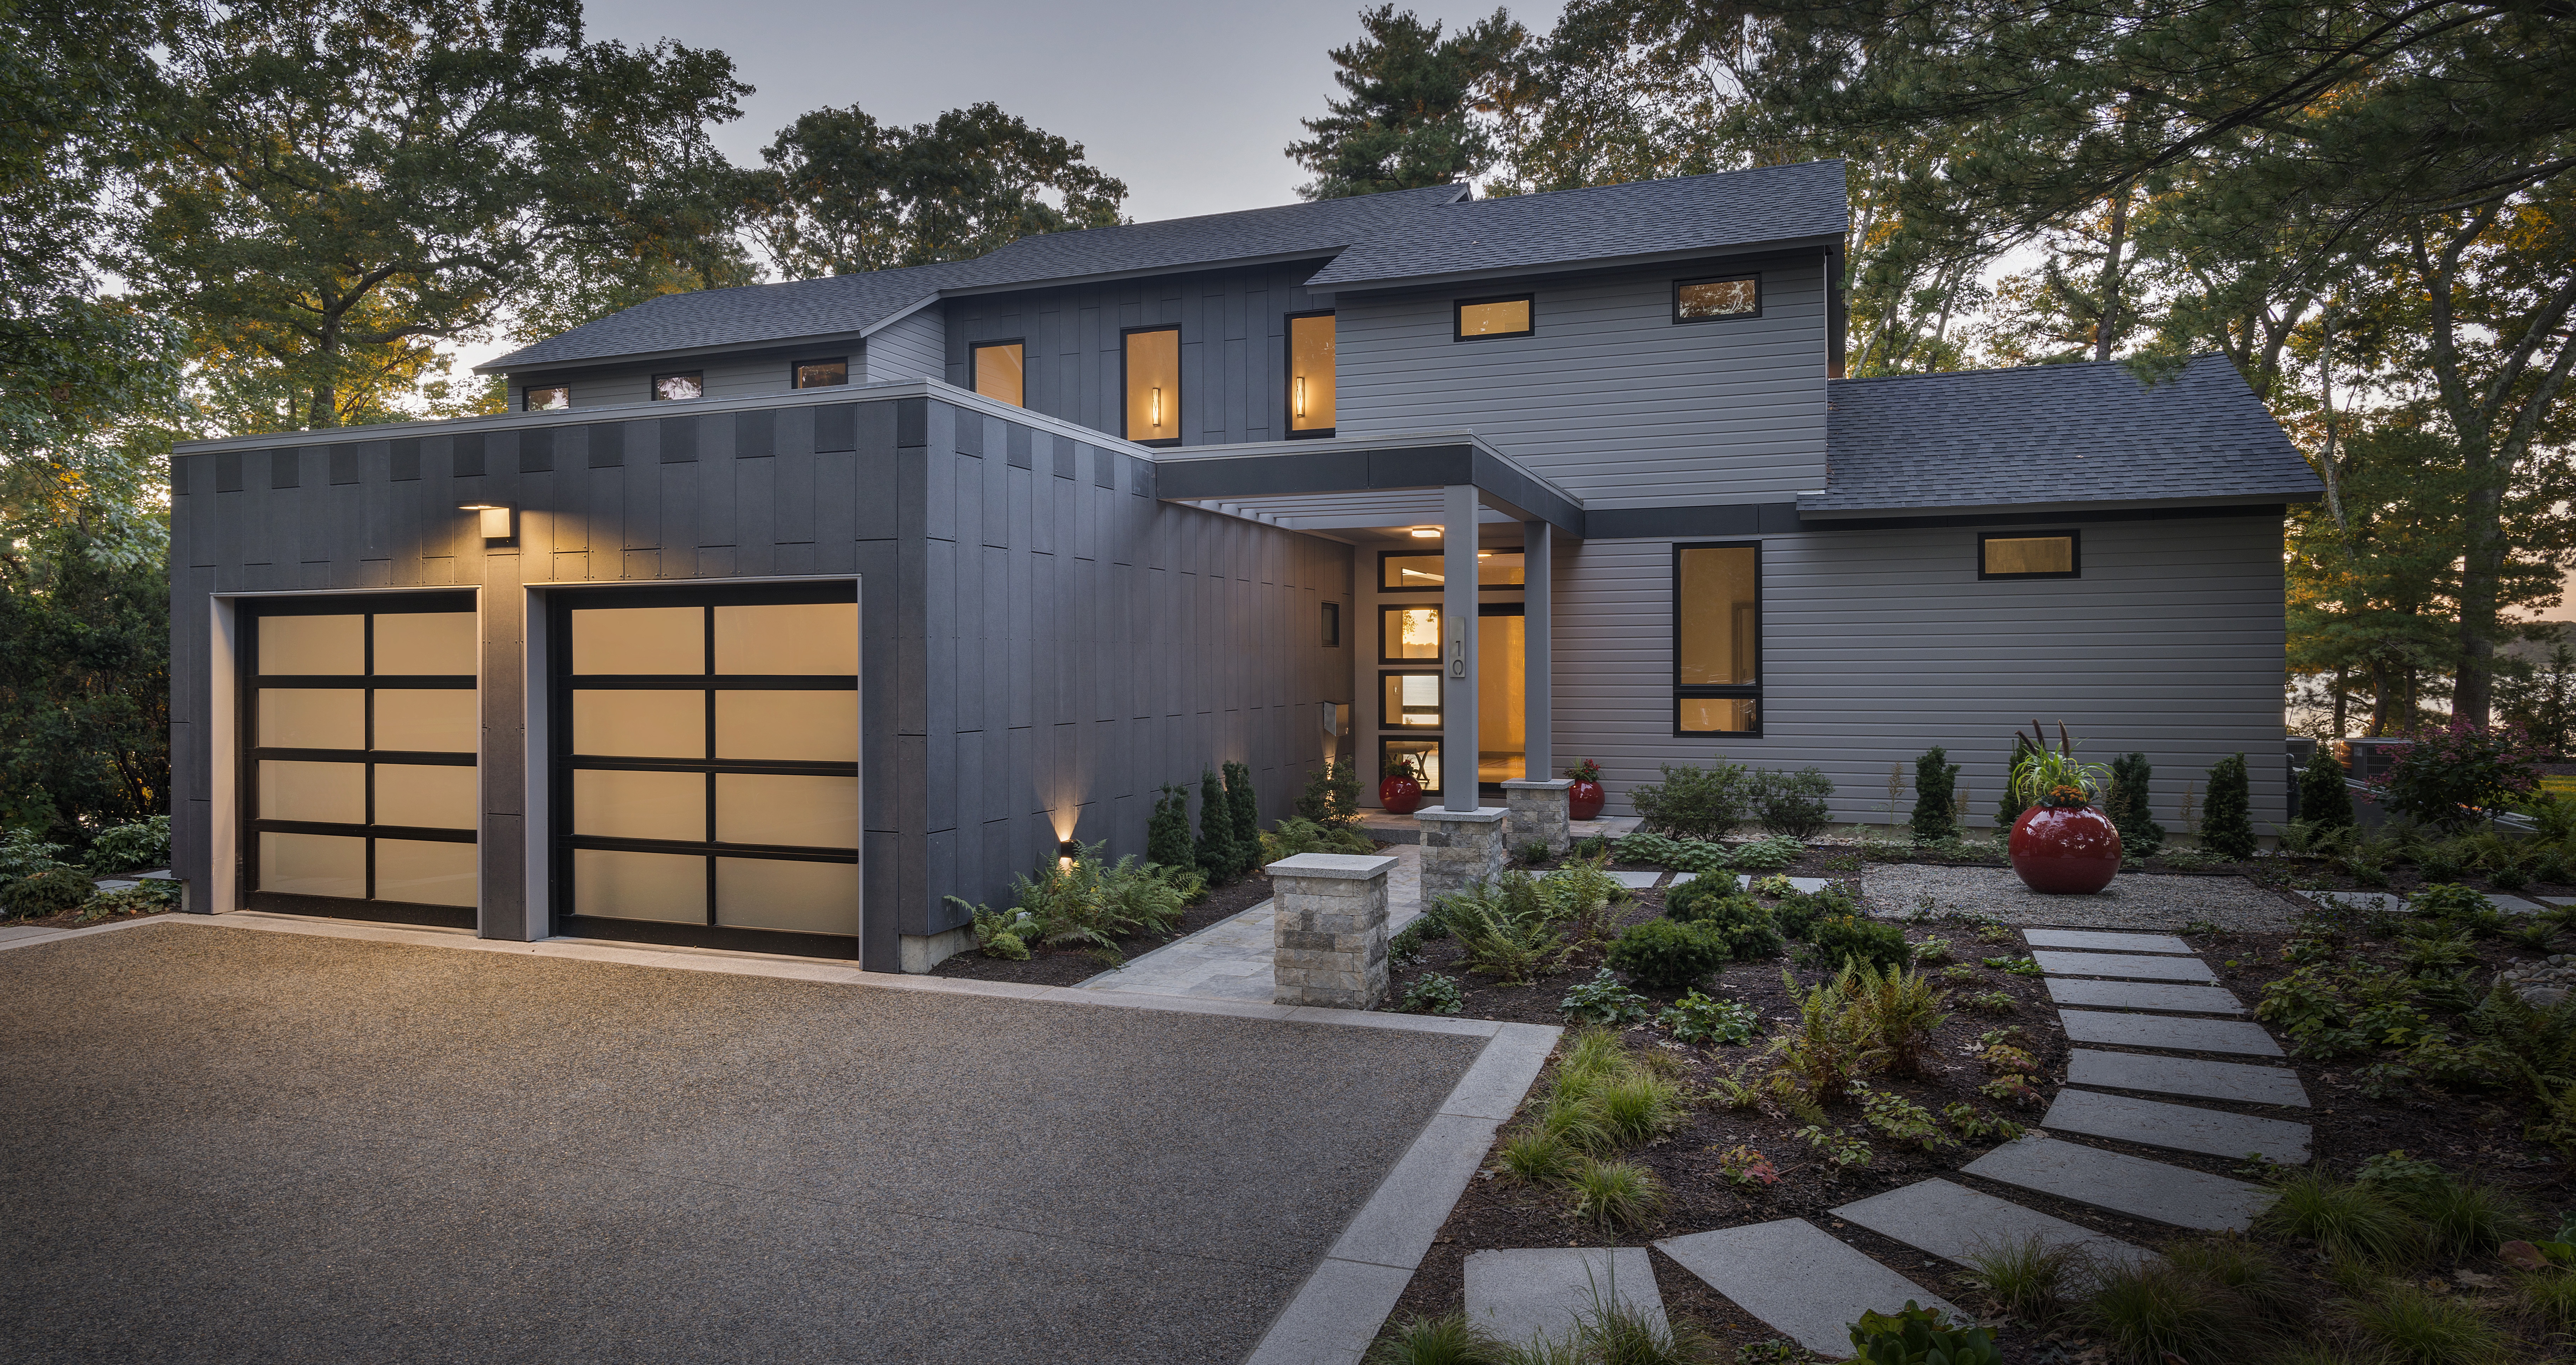 Kite-1532-Hundred Acre Cove-Greenspan Residence-Exterior_Night-Front